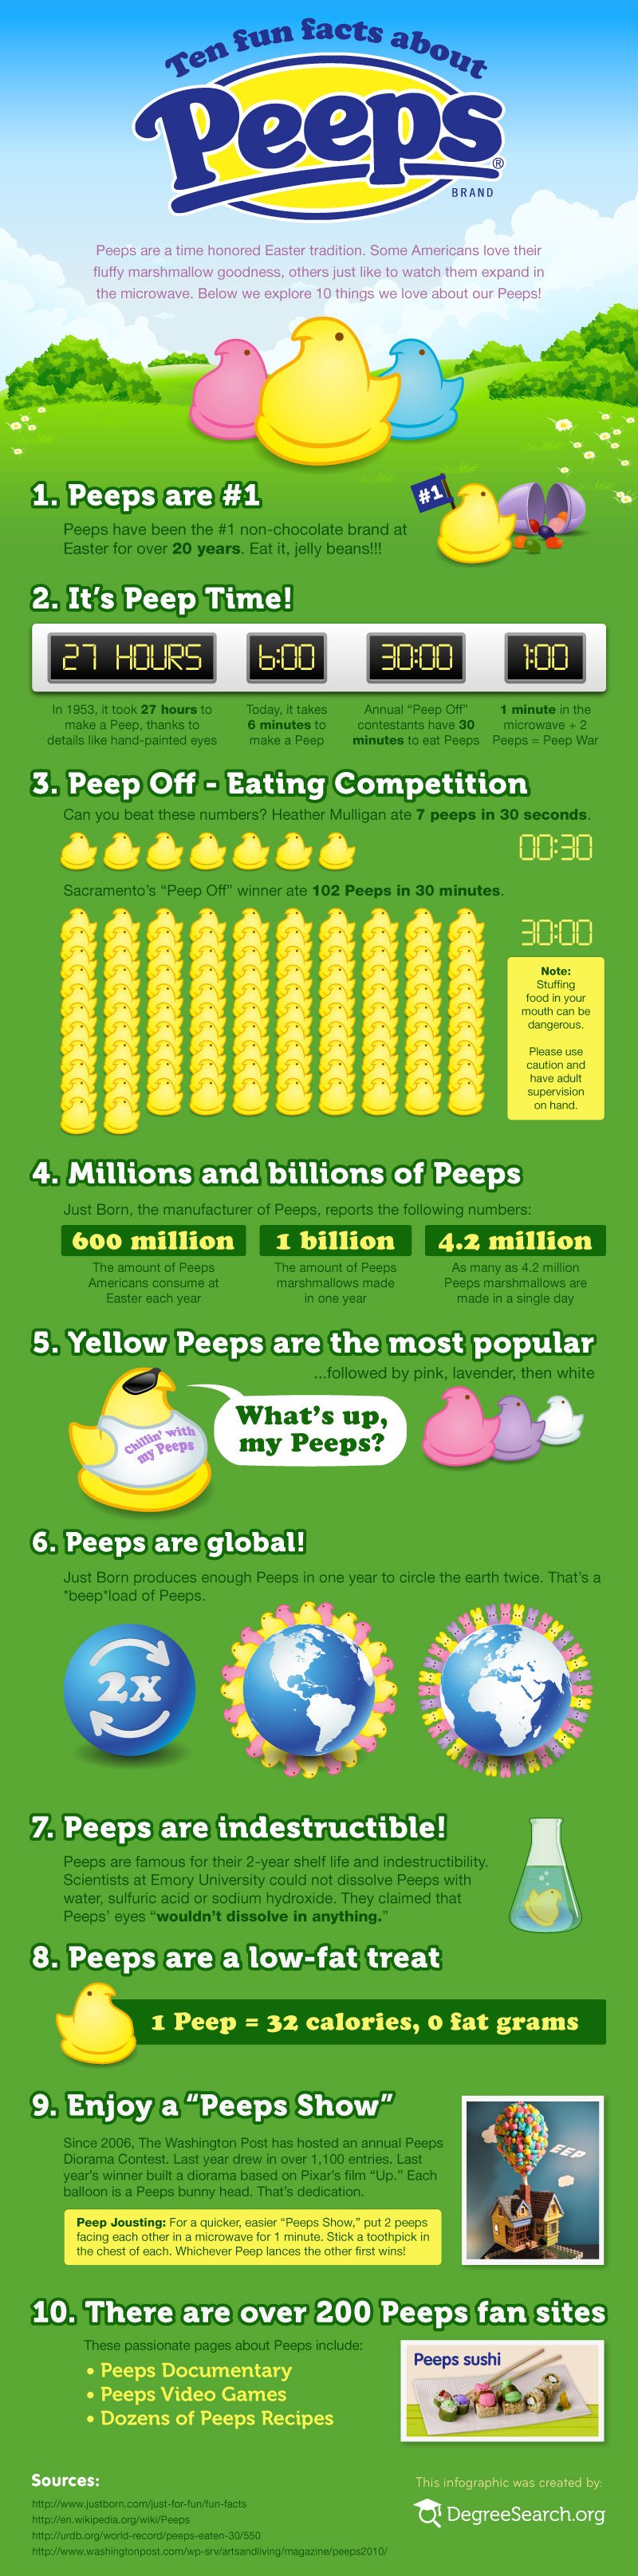 Ten fun facts about Peeps [infographic]